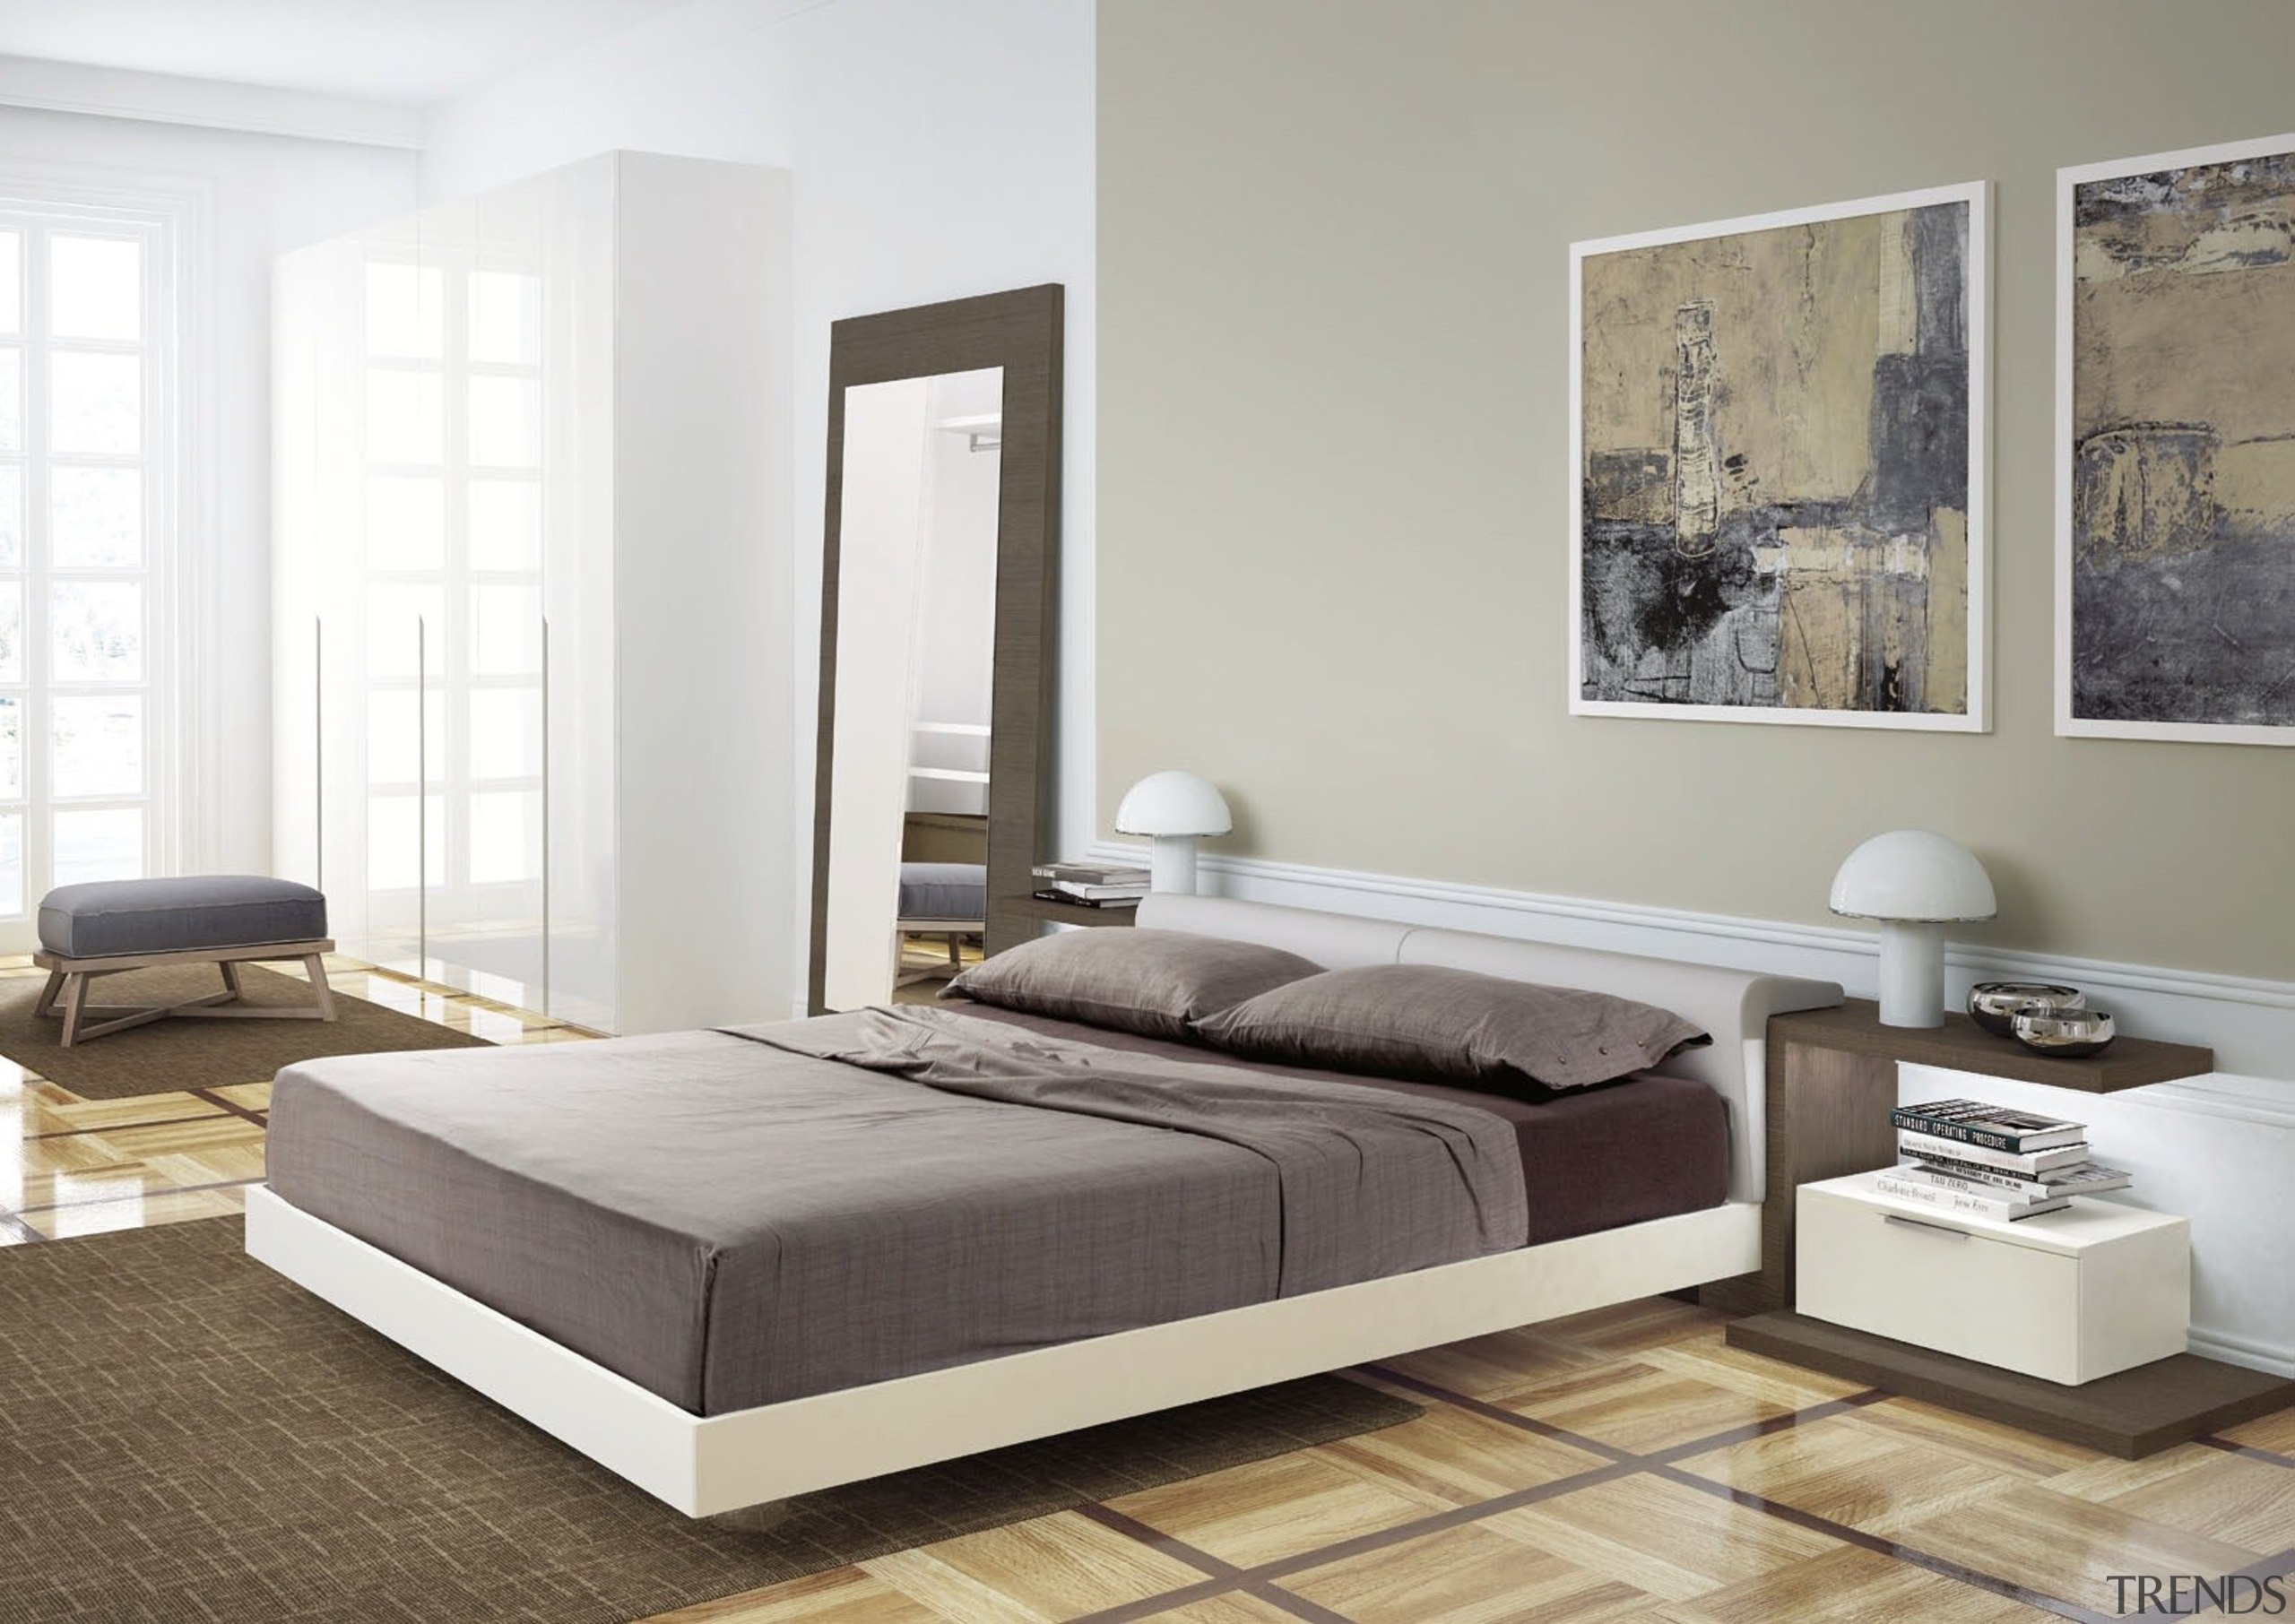 For more information, please visit www.archinteriors.co.nz bed, bed frame, bed sheet, bedroom, couch, floor, furniture, interior design, living room, mattress, sofa bed, white